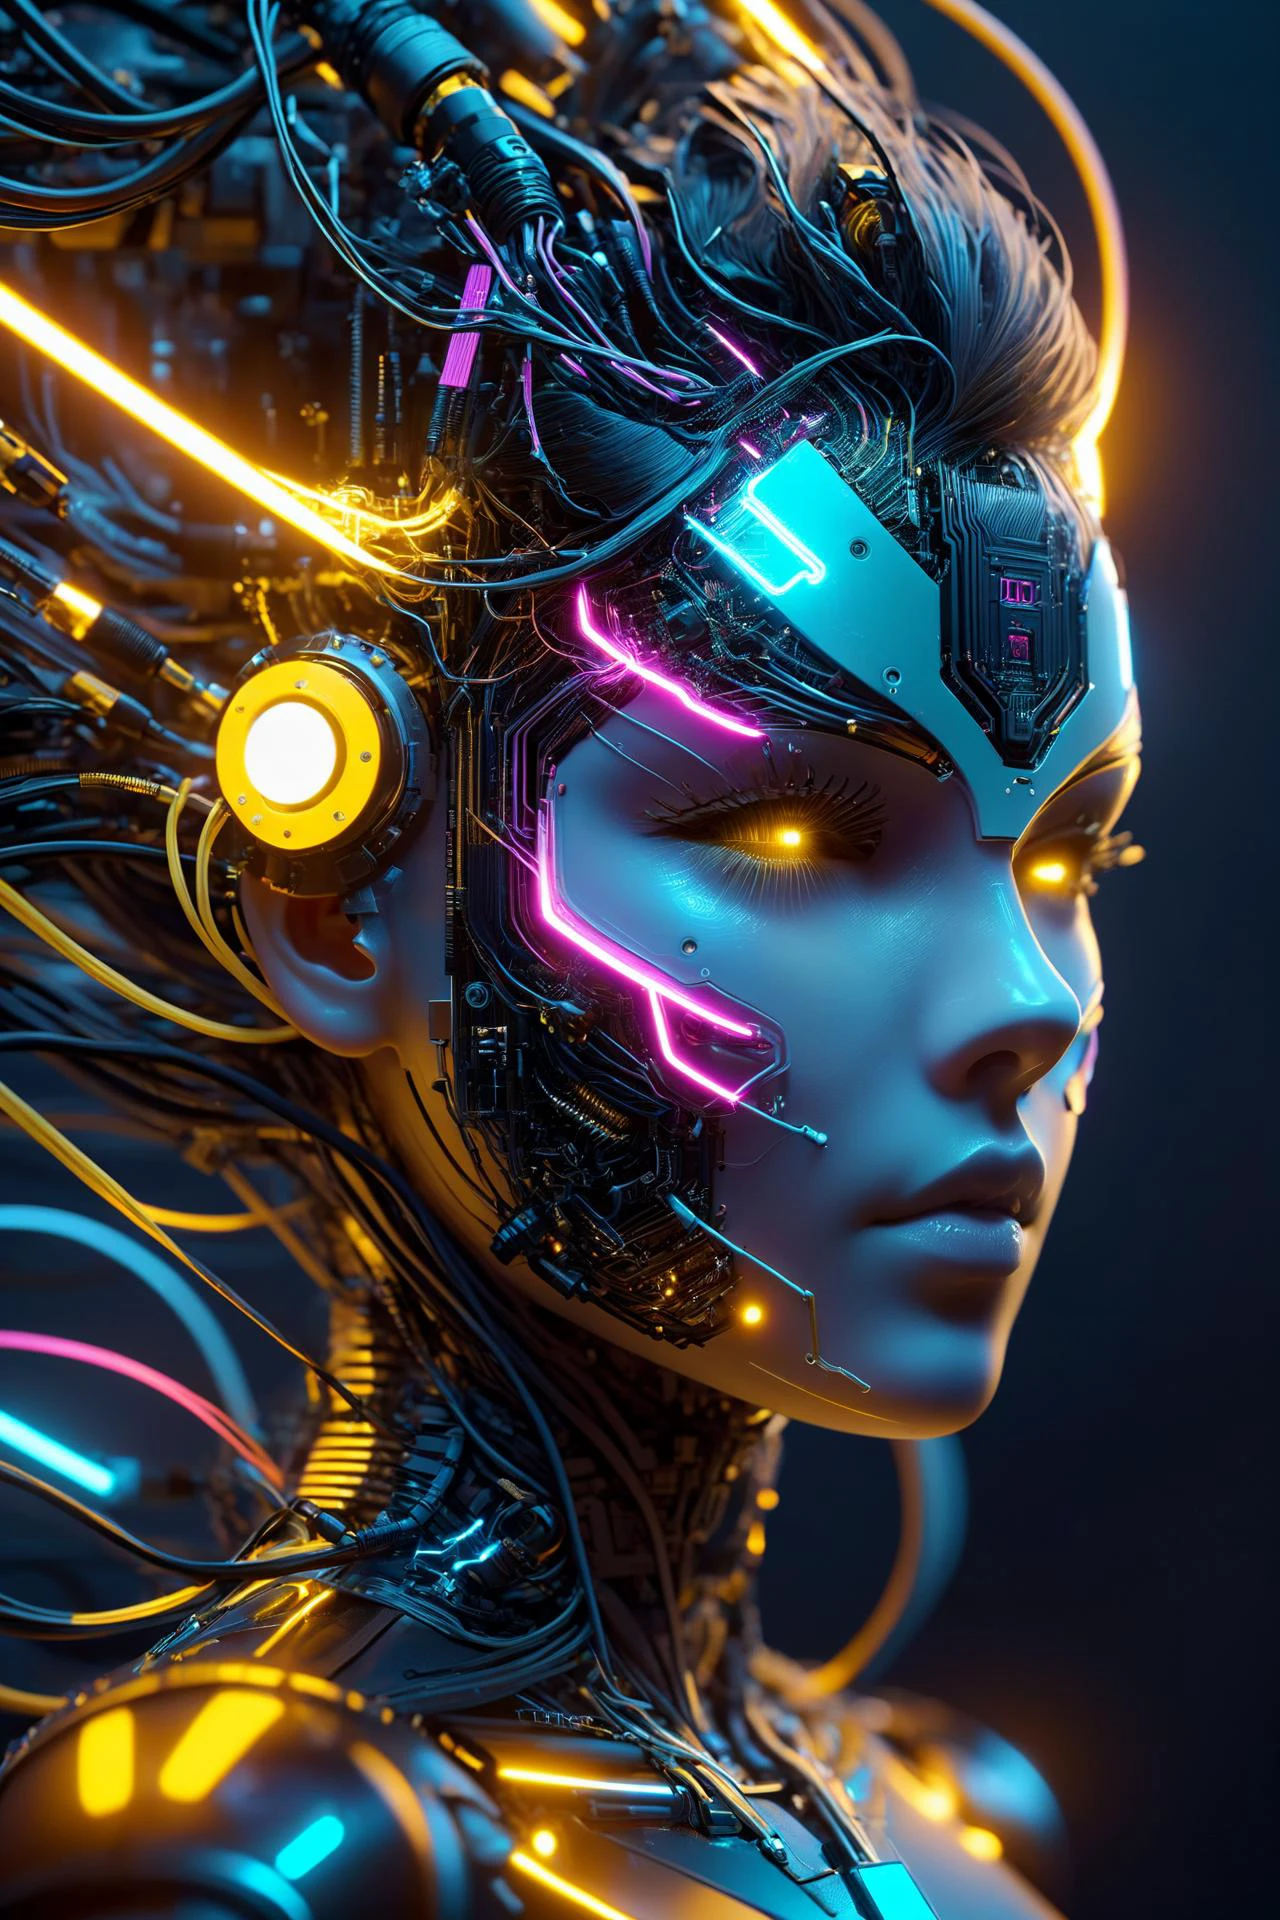 the head of a female cyborg, by Ralph McQuarrie, by Aaron Horkey, neon yellow lightning, neon teal lightning, neon magenta lightning, cables, wires, synthwave, vaporwave, retro futurism, circuitboard, dark futuristic, DonMW15pXL, floating, astral ziprealism, (masterpiece:1.2), best quality, (hyperdetailed, highest detailed:1.2), high resolution textures, 